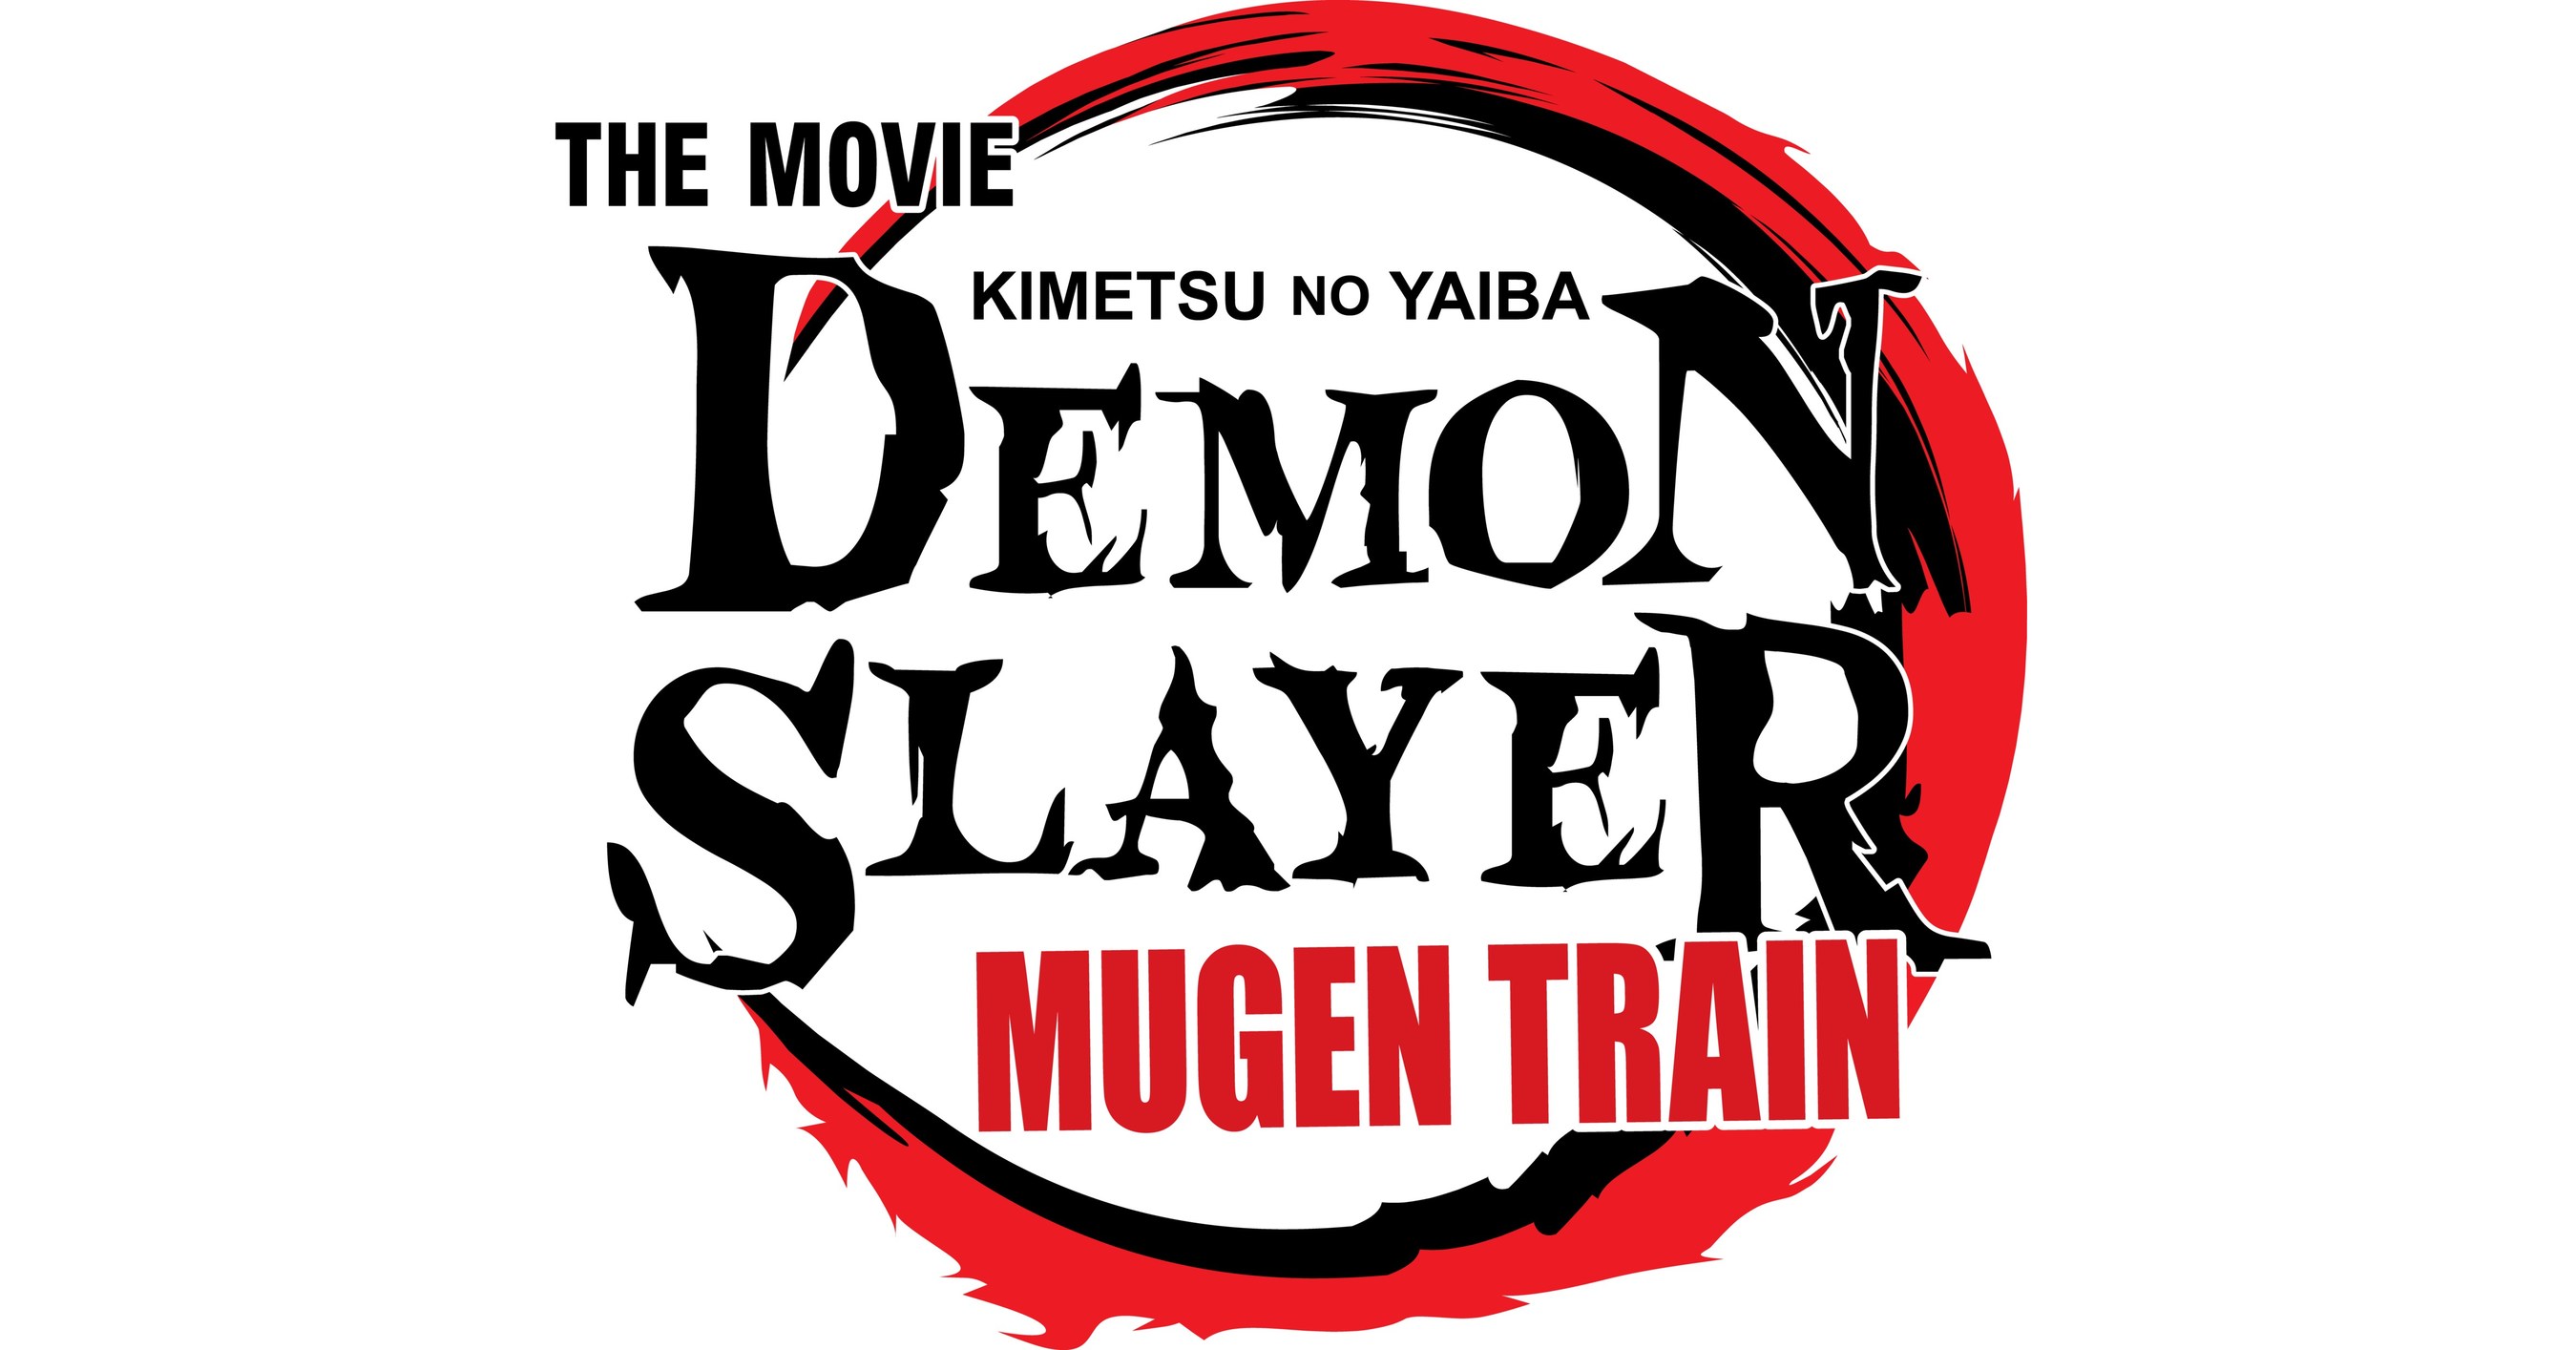 Demon Slayer Kimetsu No Yaiba The Movie Mugen Train Continues To Dominate Box Offices As Fastest Film To Achieve Over 100m In Japan